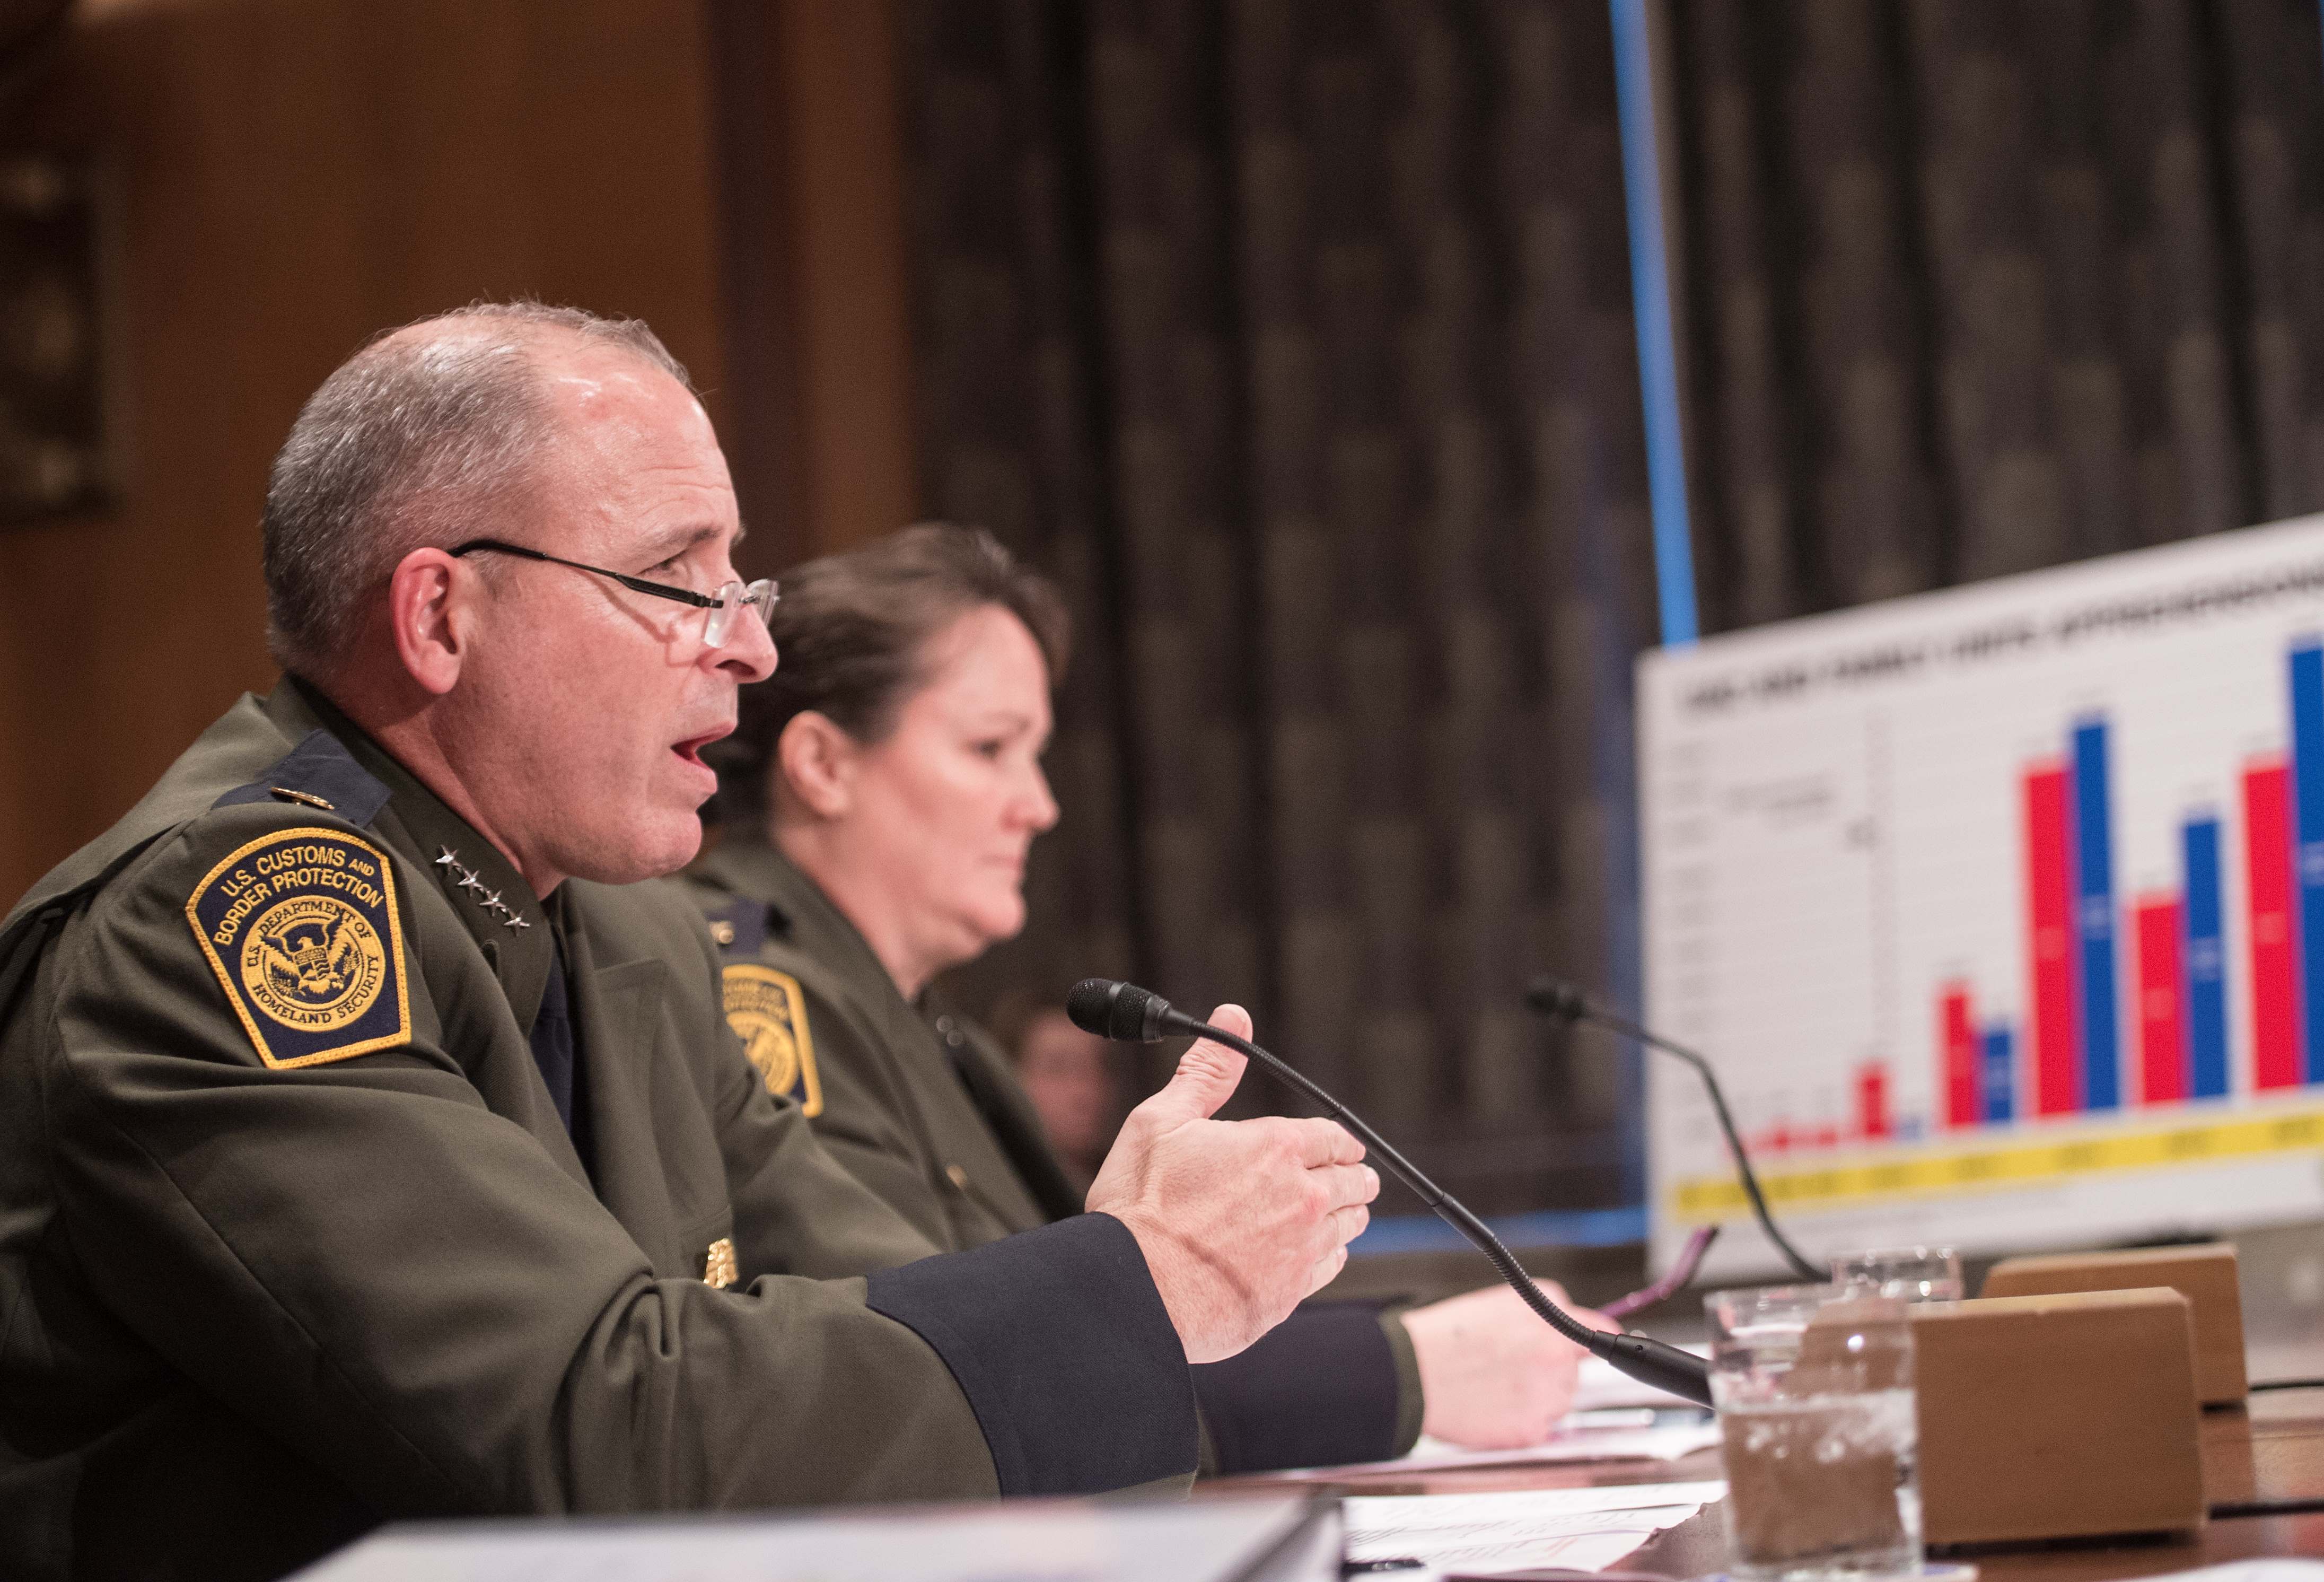 Mark Morgan, chief of the US Border Patrol, and his deputy Carla Provost testify at a Senate Homeland Security and Governmental Affairs Committee hearing on "Initial Observations of the New Leadership at the US Border Patrol" on Capitol Hill in Washington, DC, on November 30, 2016. (NICHOLAS KAMM/AFP/Getty Images)